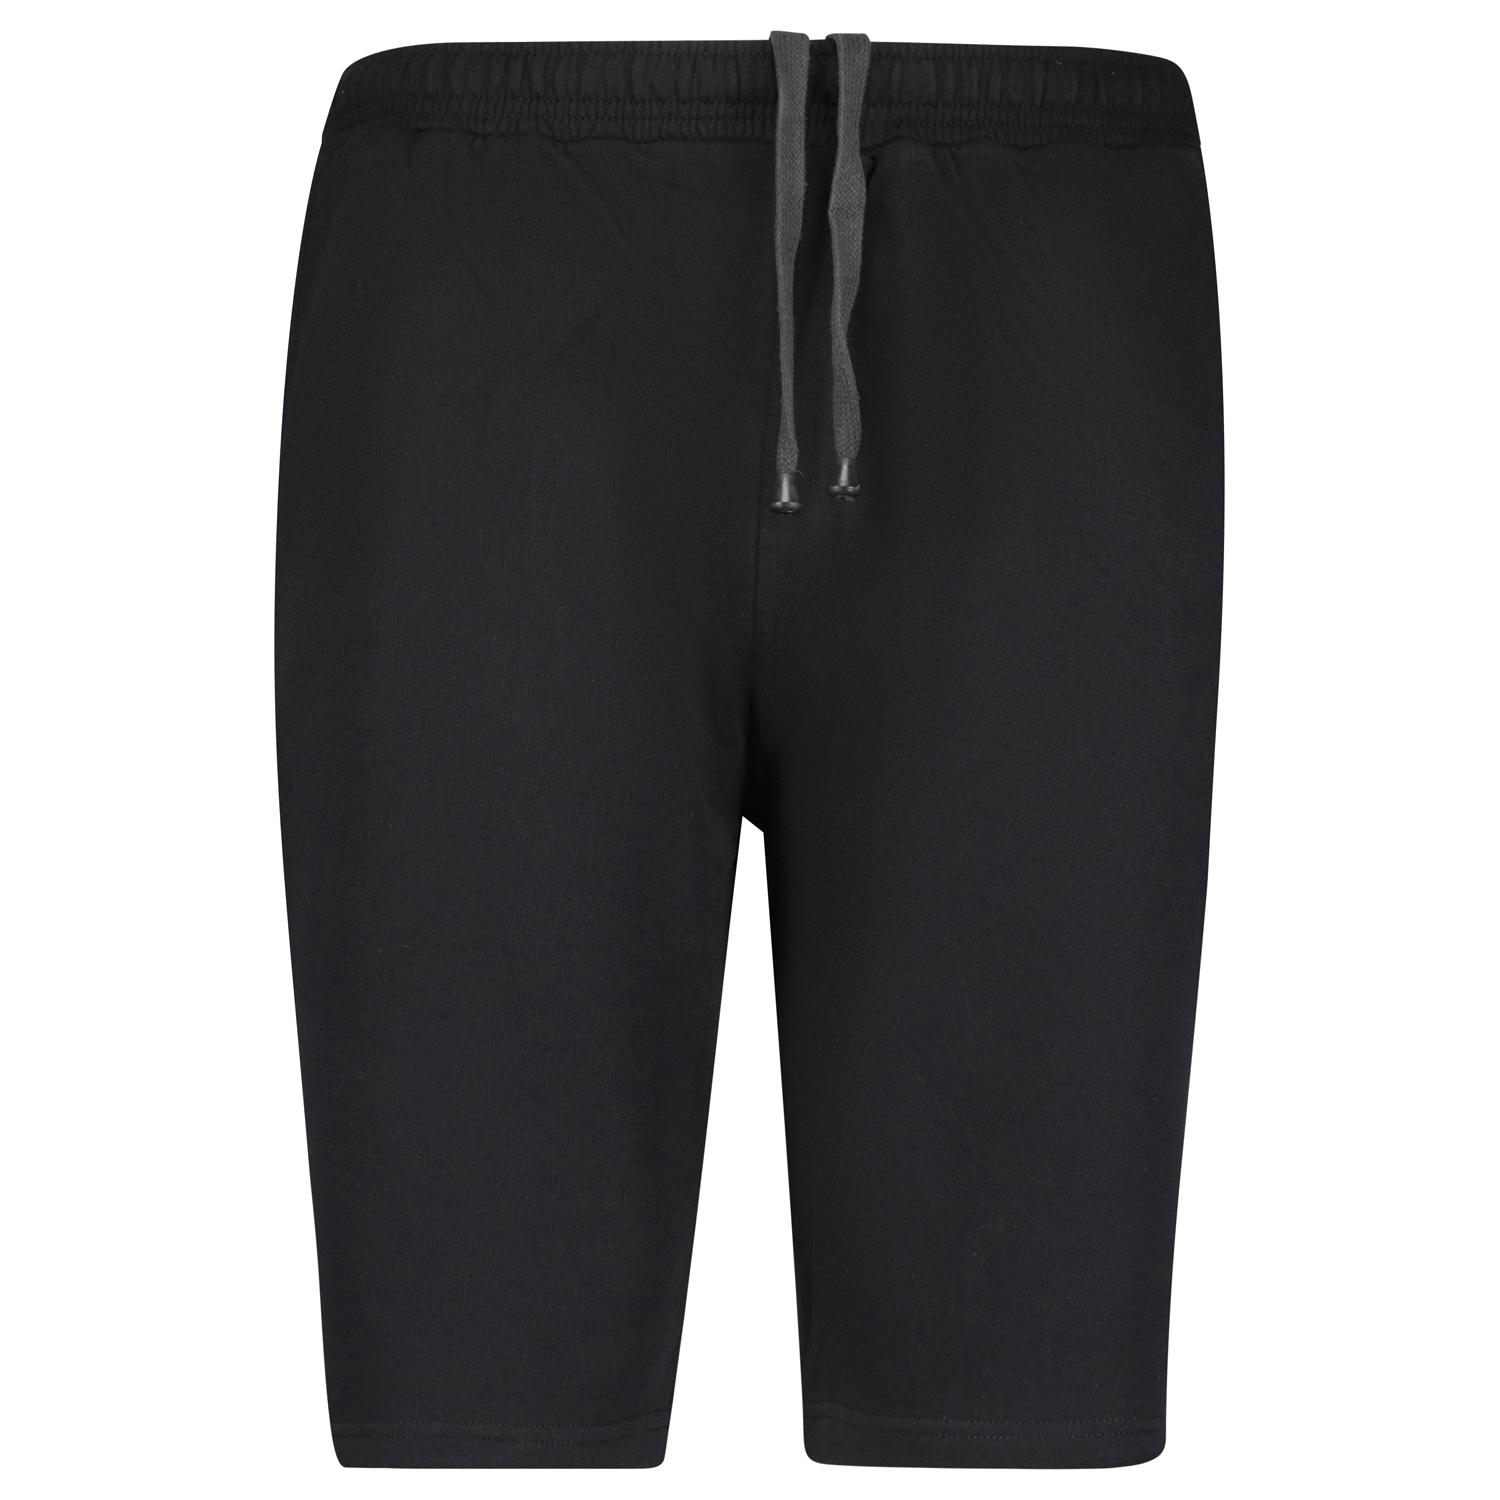 Black short jogging trousers up to 14XL by Adamo